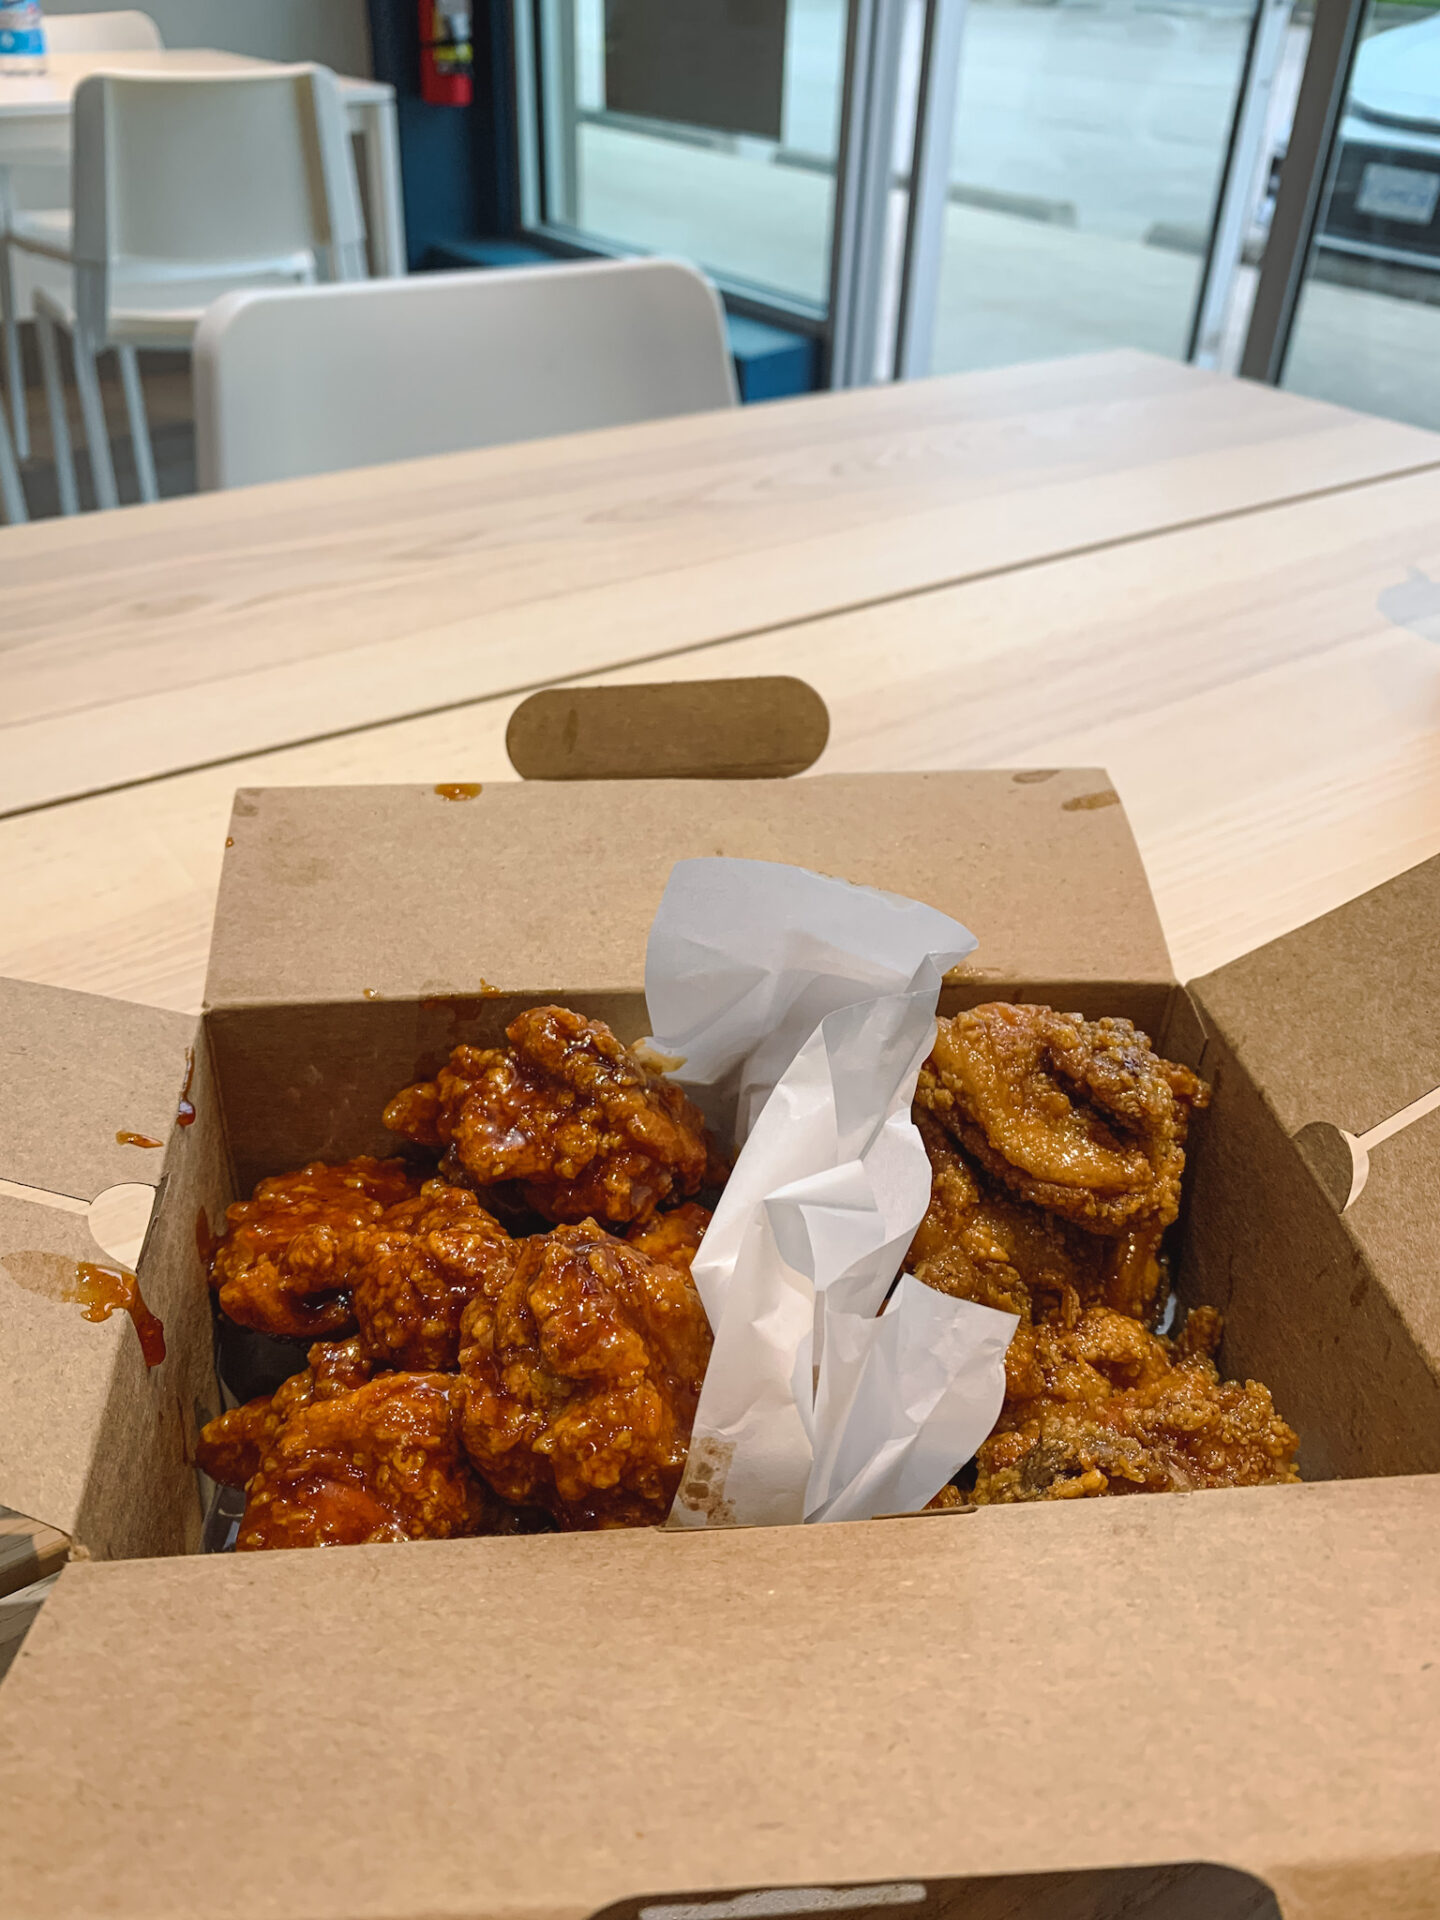 Yangyeom and soy garlic fried chicken from Chicko Chicken in Vancouver, British Columbia